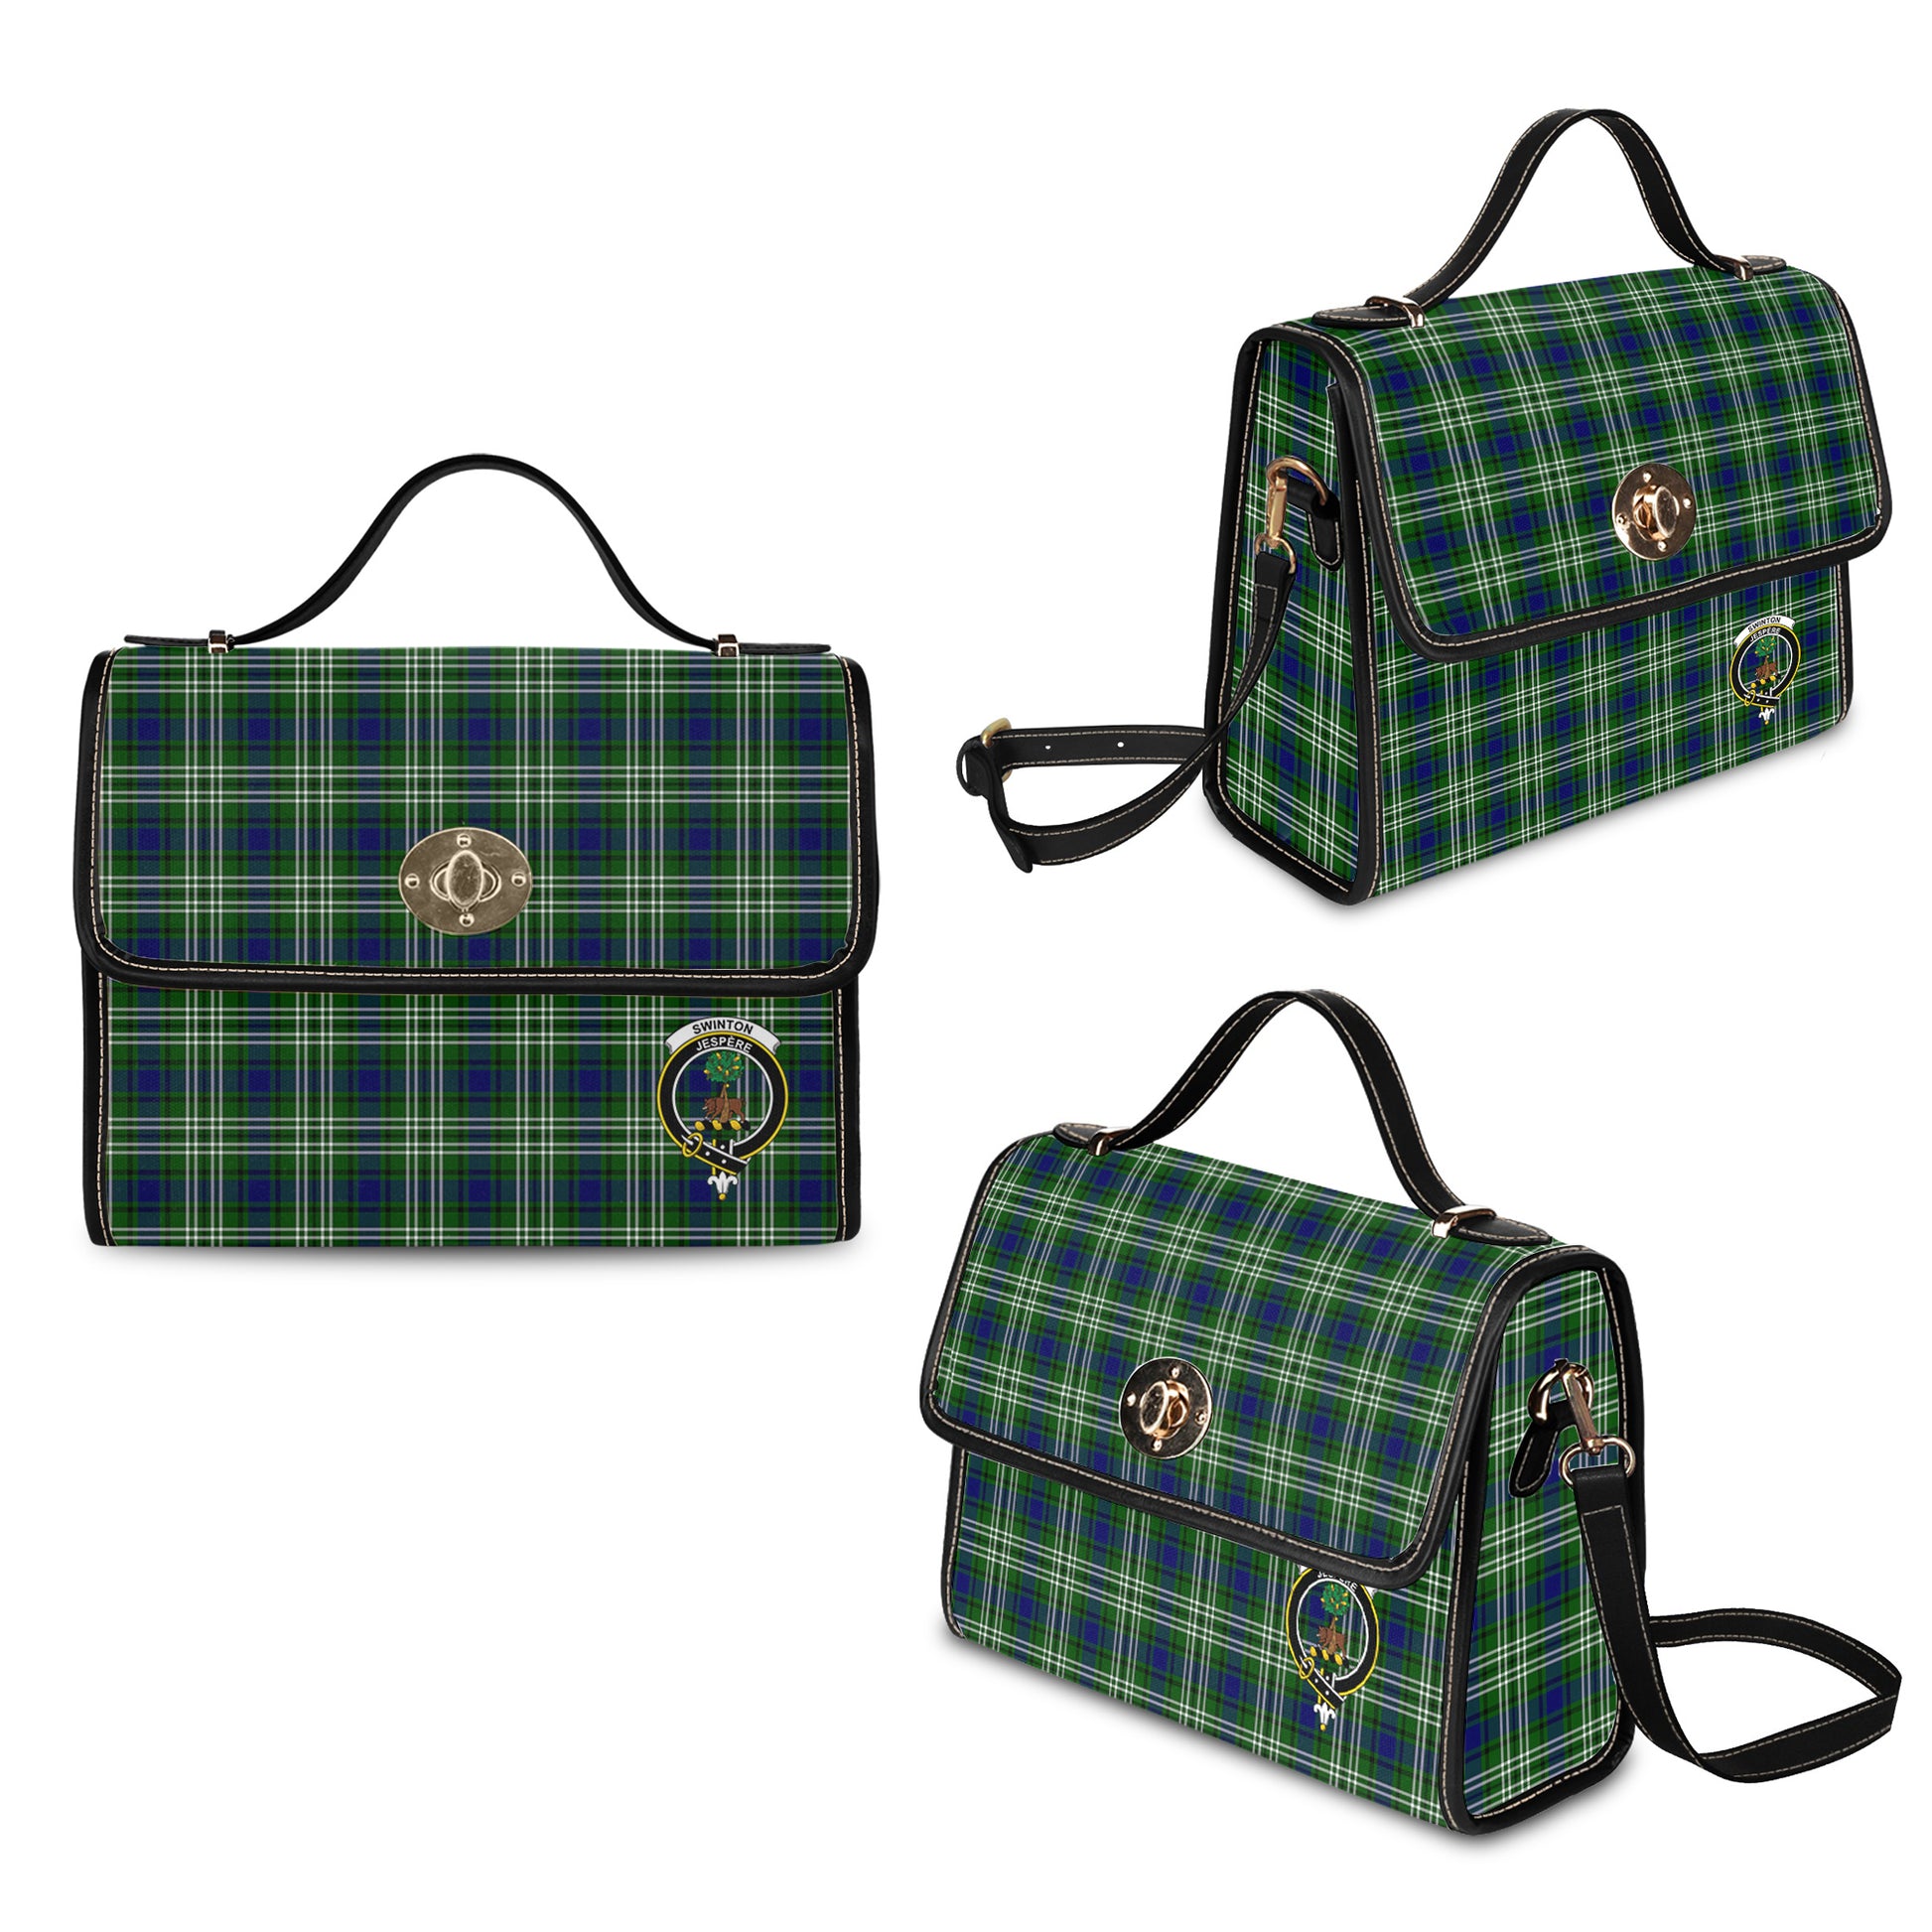 swinton-tartan-leather-strap-waterproof-canvas-bag-with-family-crest